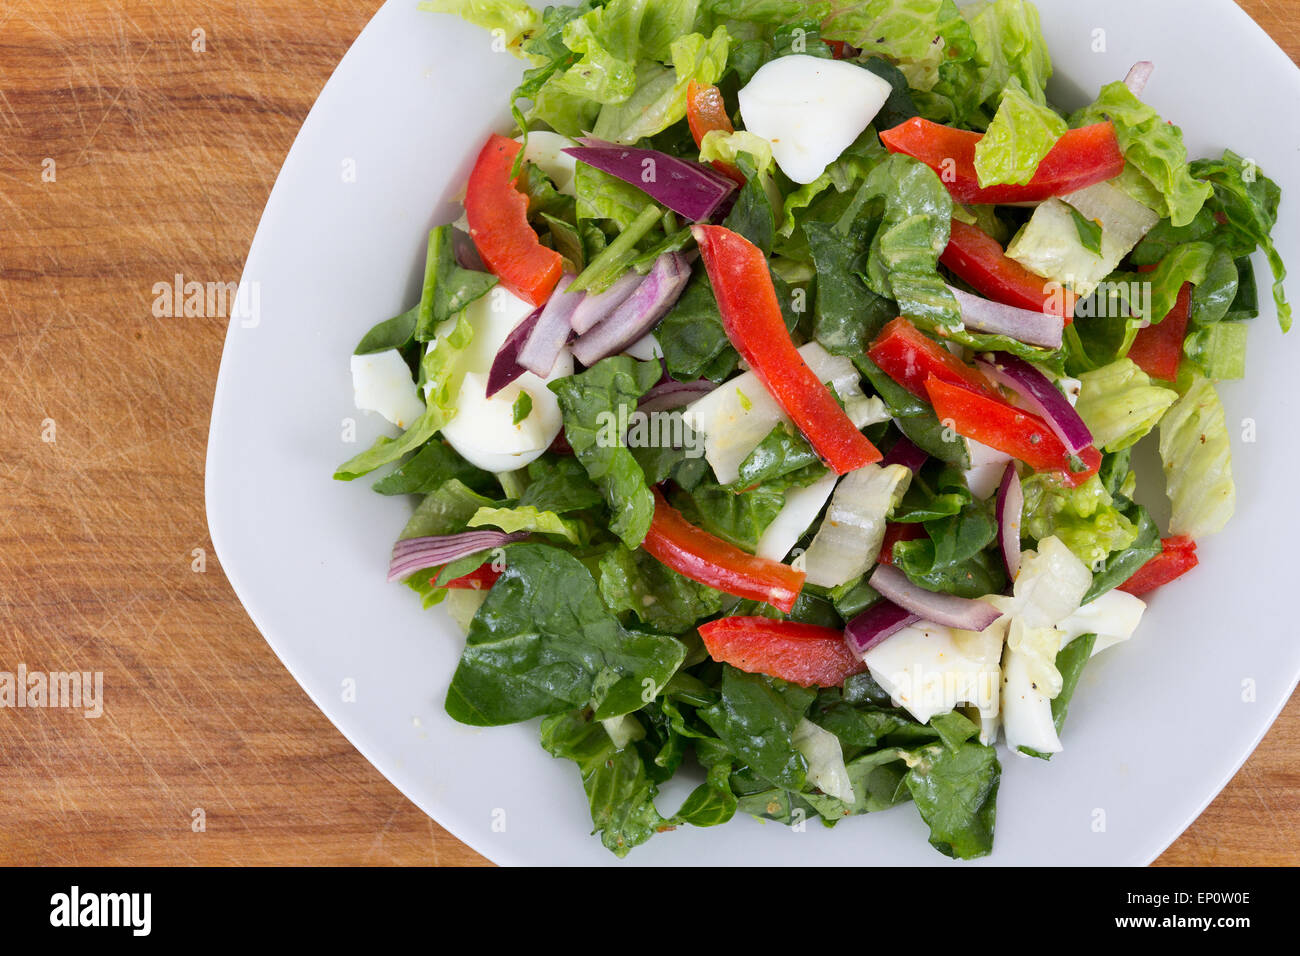 Egg and vegetables healthy organic salad Stock Photo